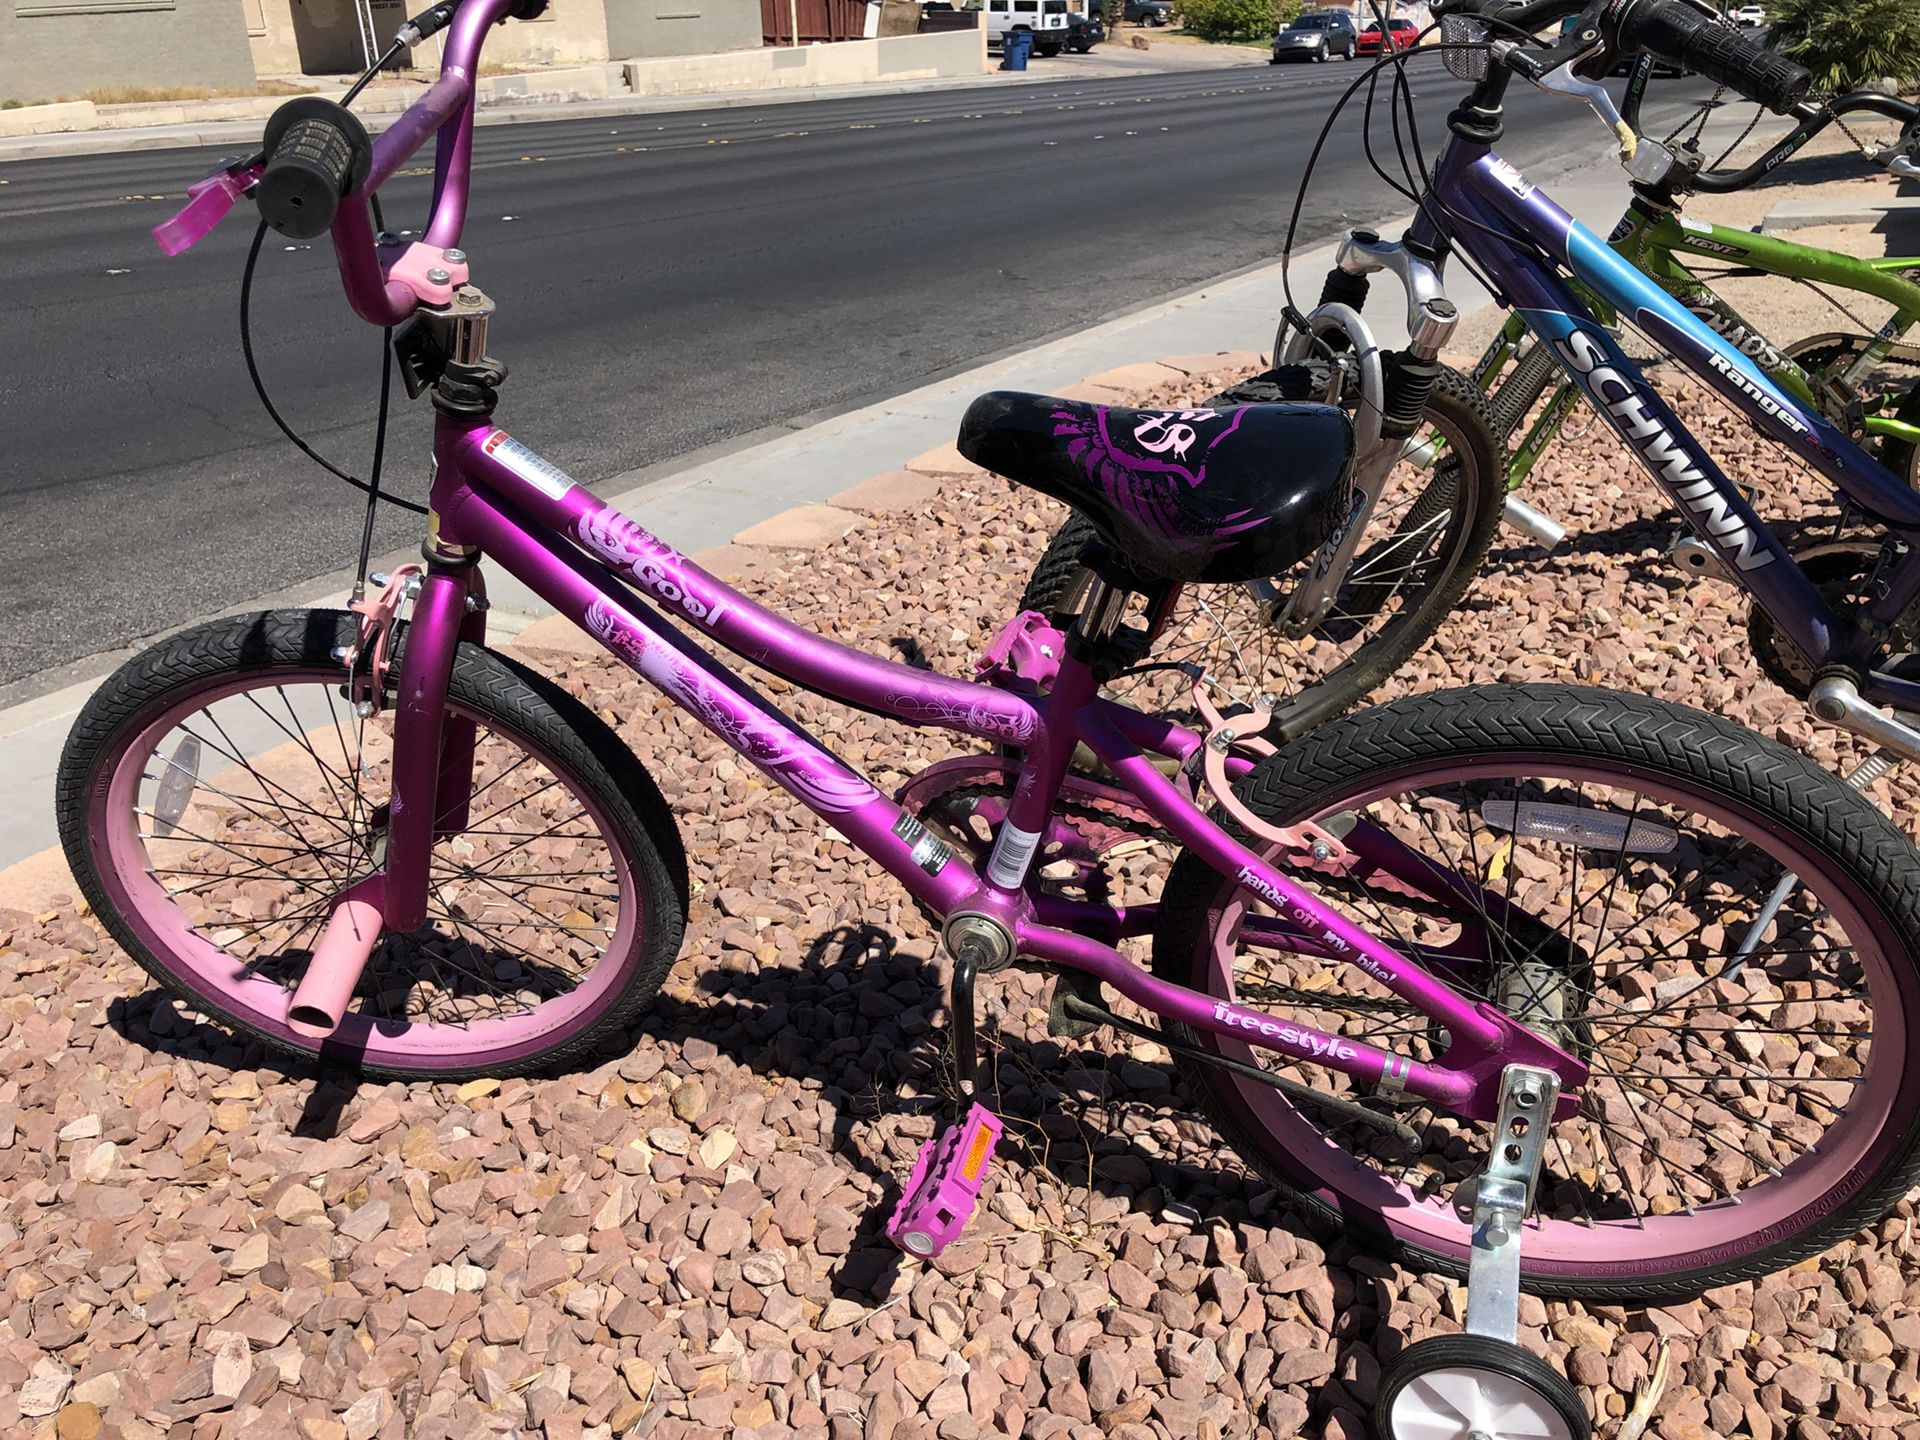 Girls bike 30.00 dlls but you have to put air in tires. Great condition.